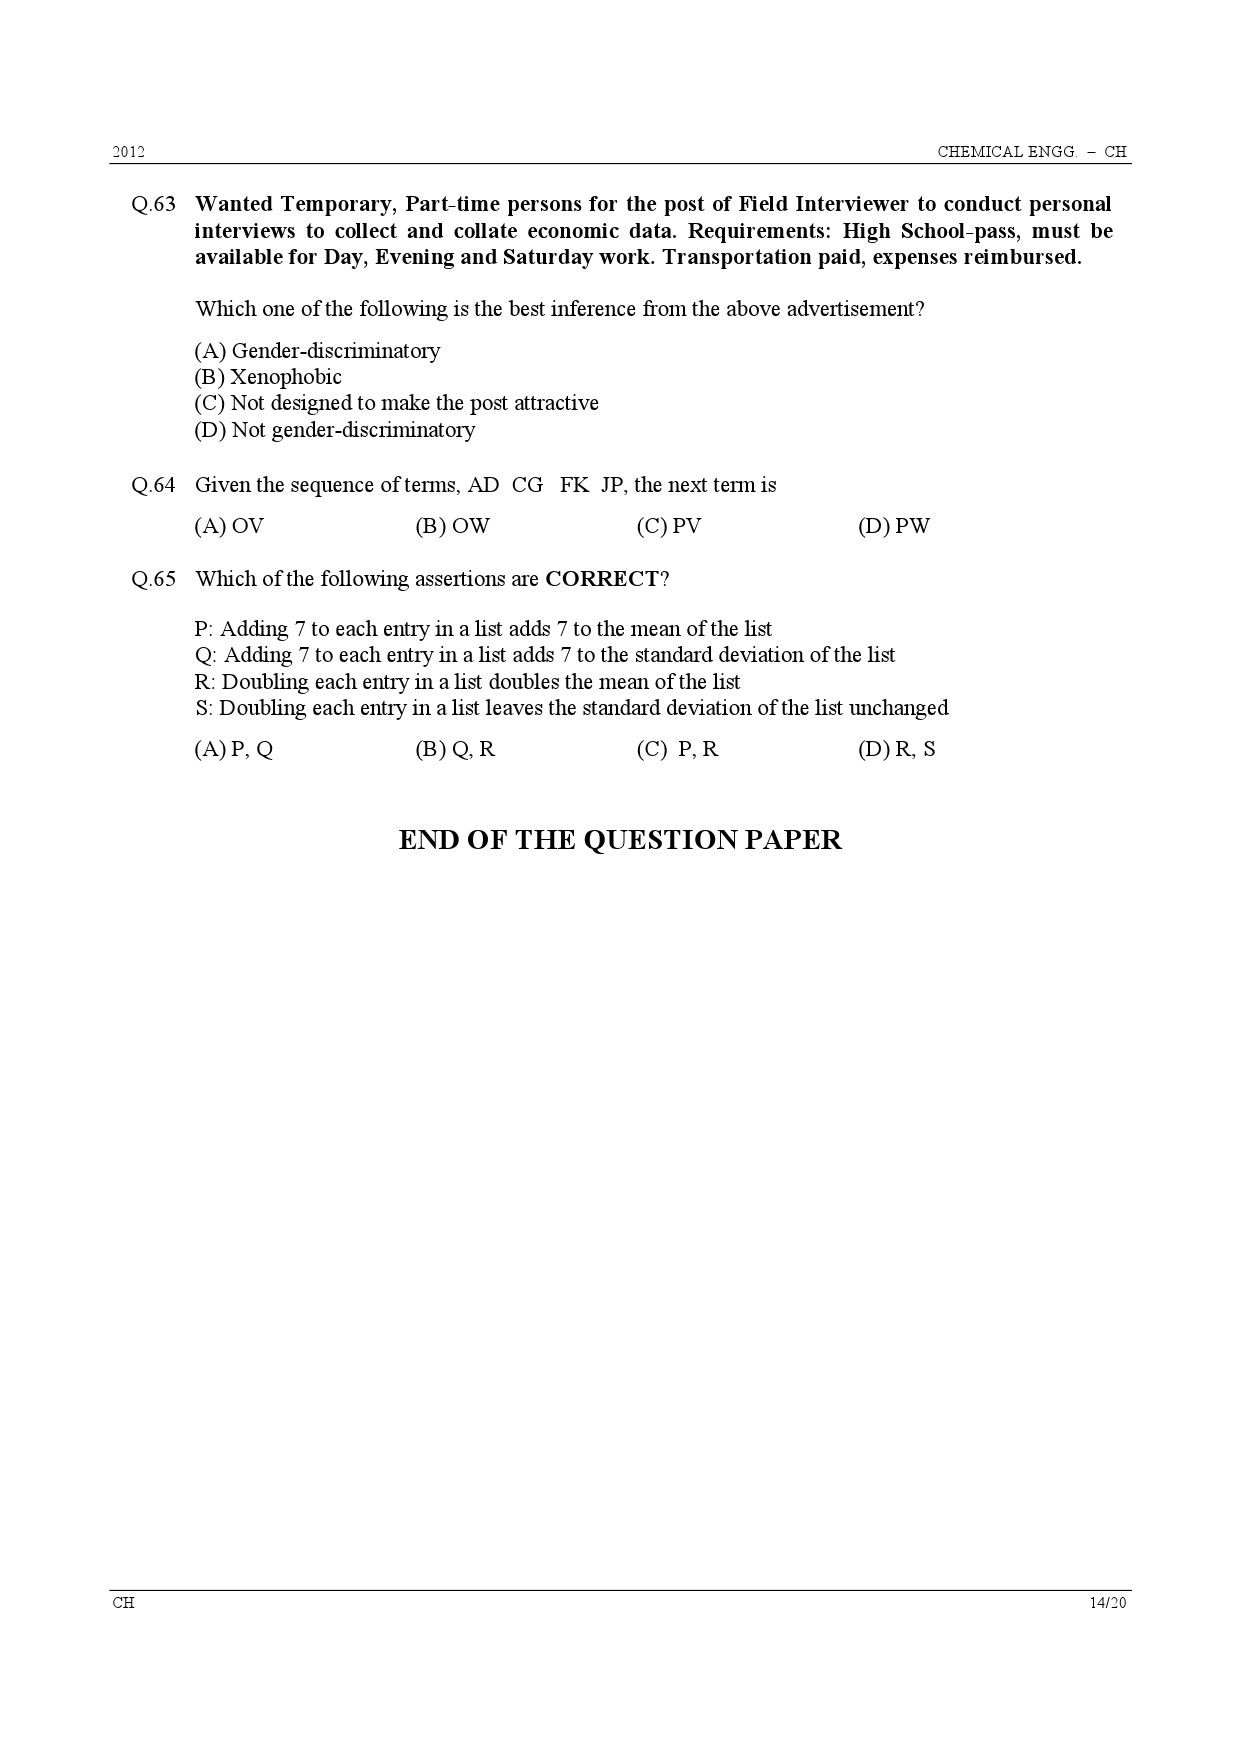 GATE Exam Question Paper 2012 Chemical Engineering 14